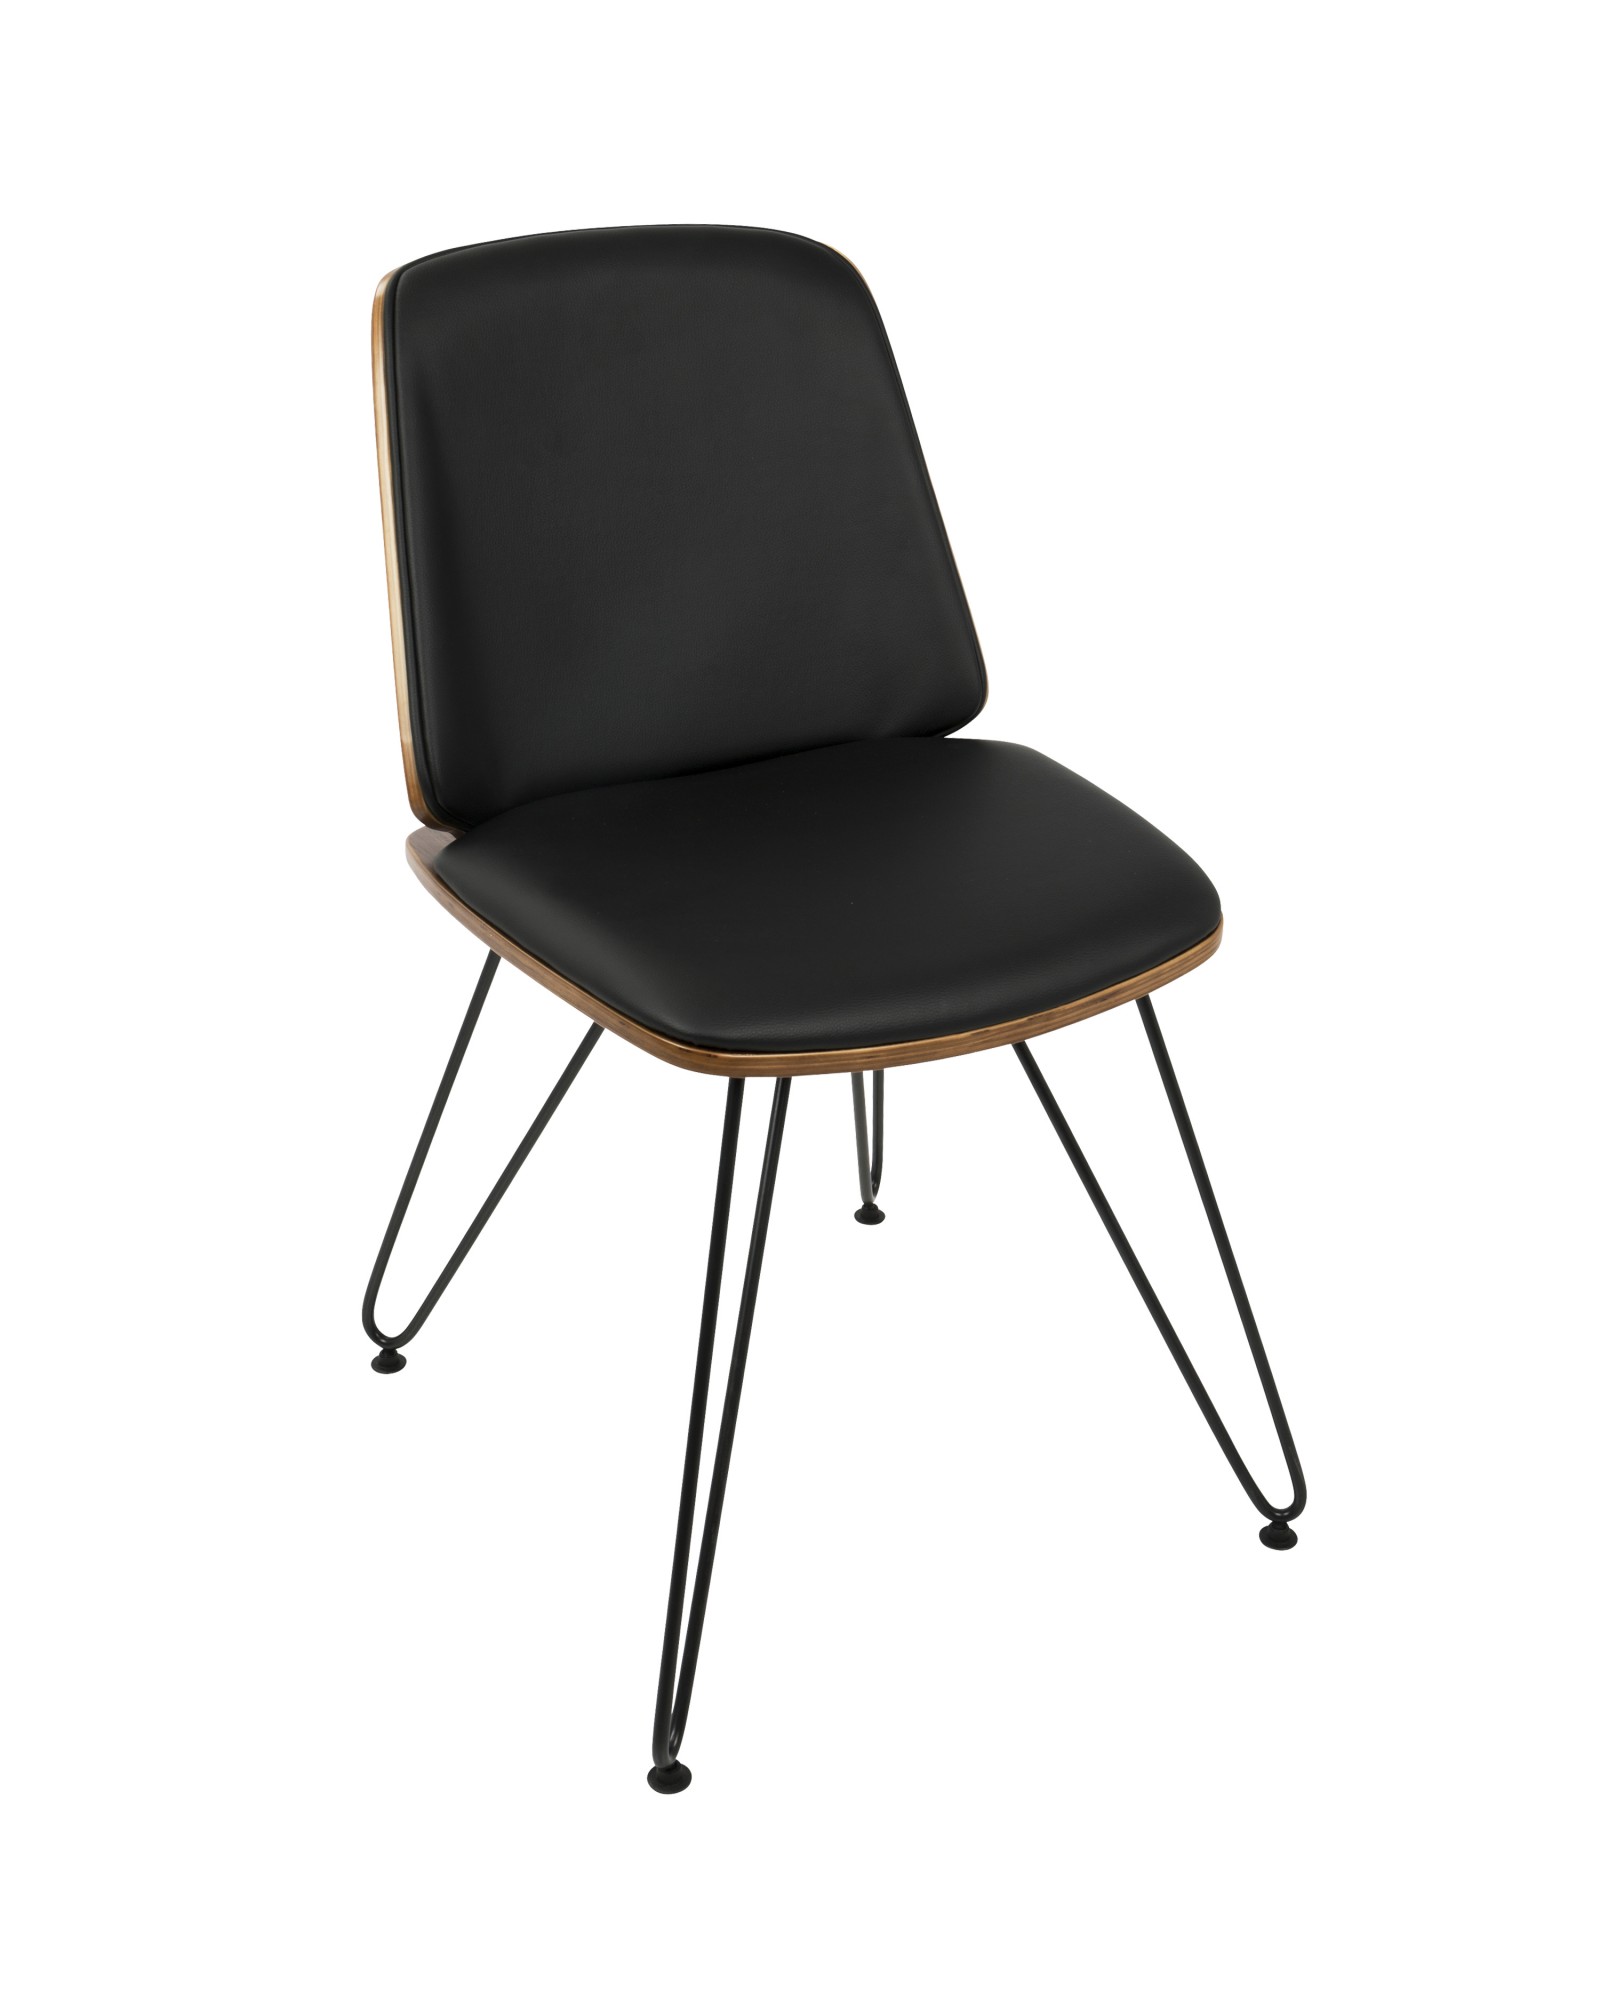 Avery Mid-Century Modern Dining/Accent Chair in Walnut Wood and Black Faux Leather - Set of 2